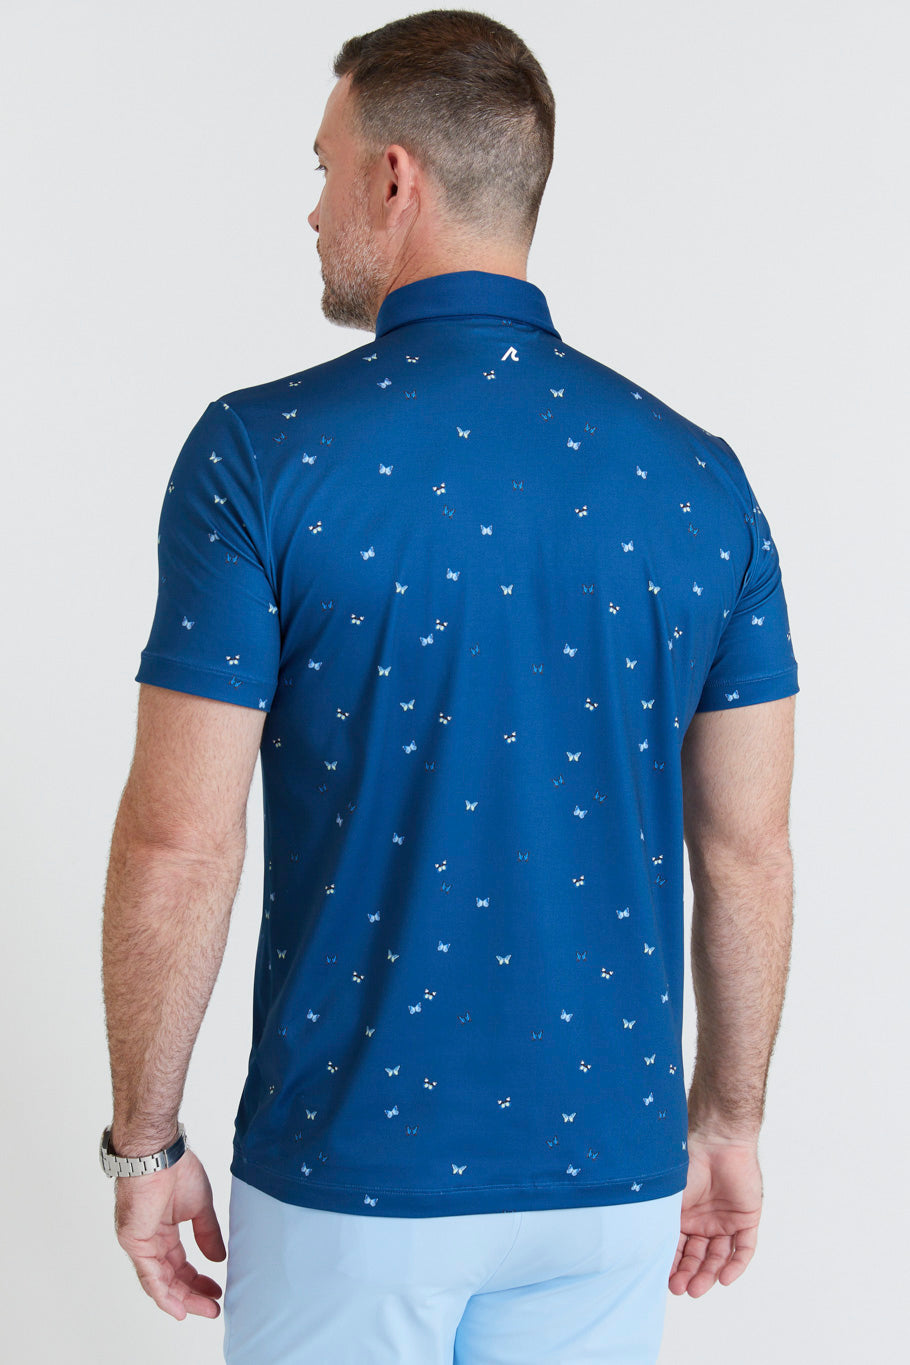 Image of the fullerton polo in admiral ss23